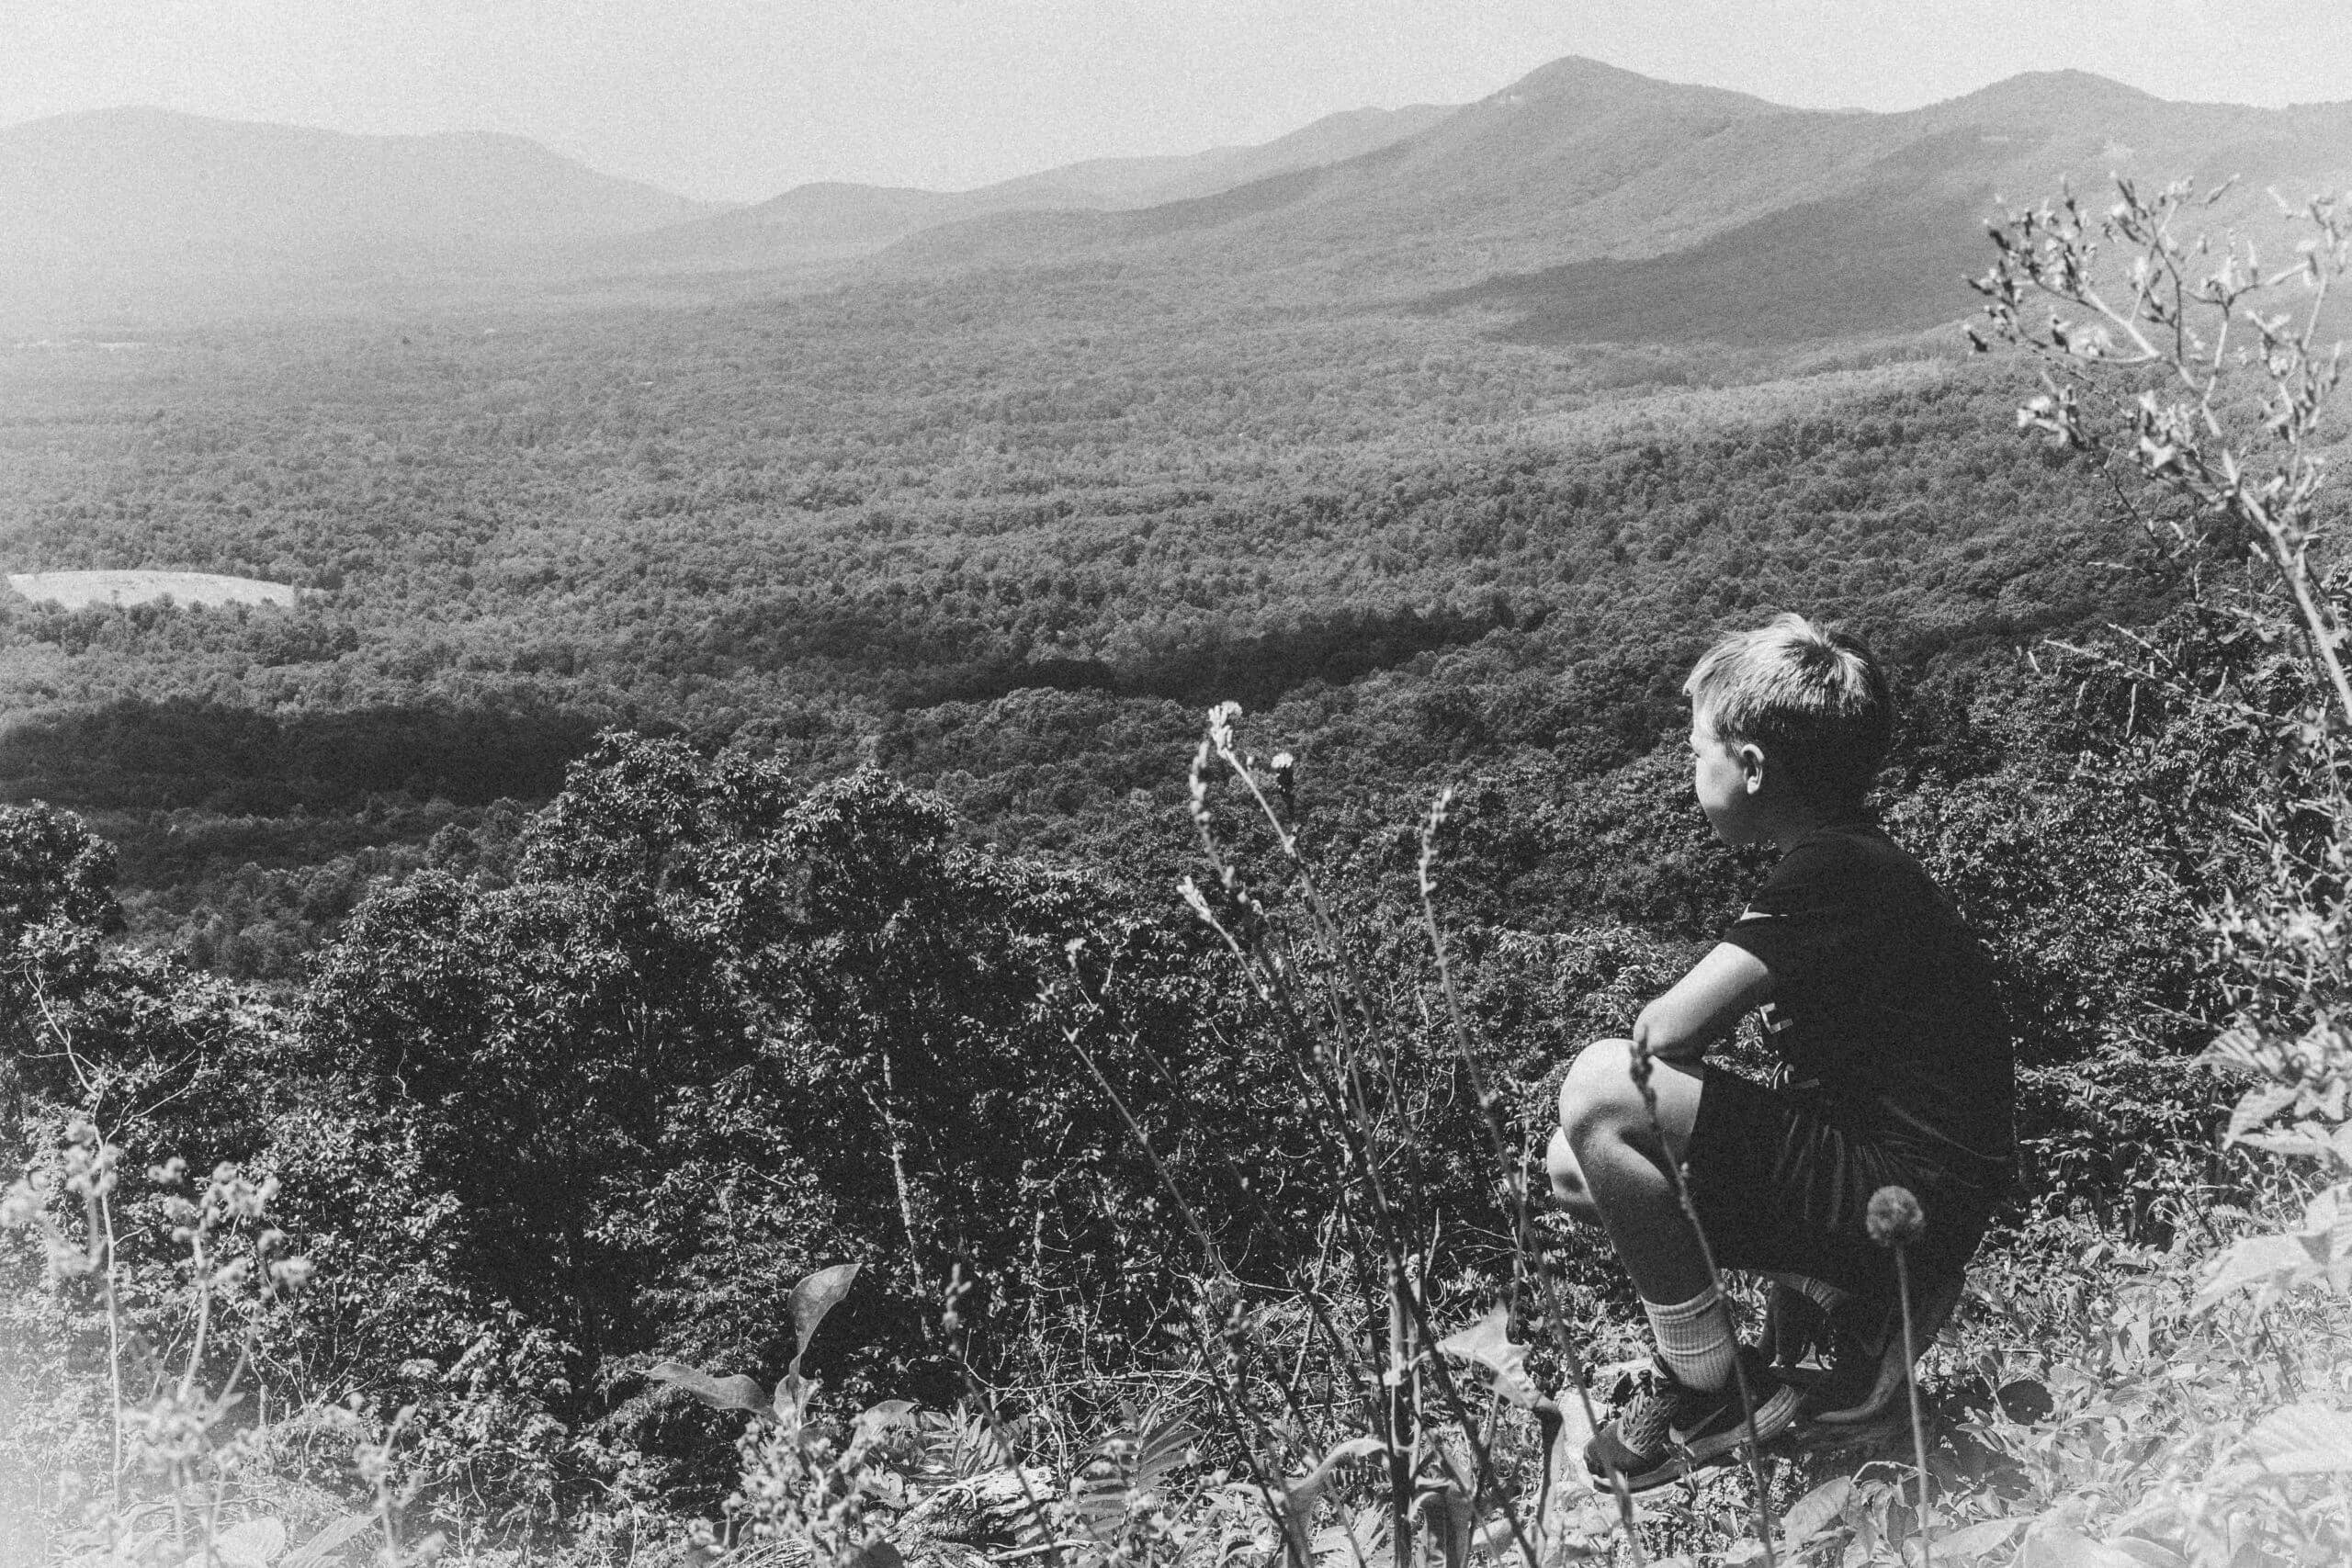 Graney black and white image of a grassy mountain scene with a white boy with blond hair crouched down in the bottom right third of the frame looking out at the landscape.